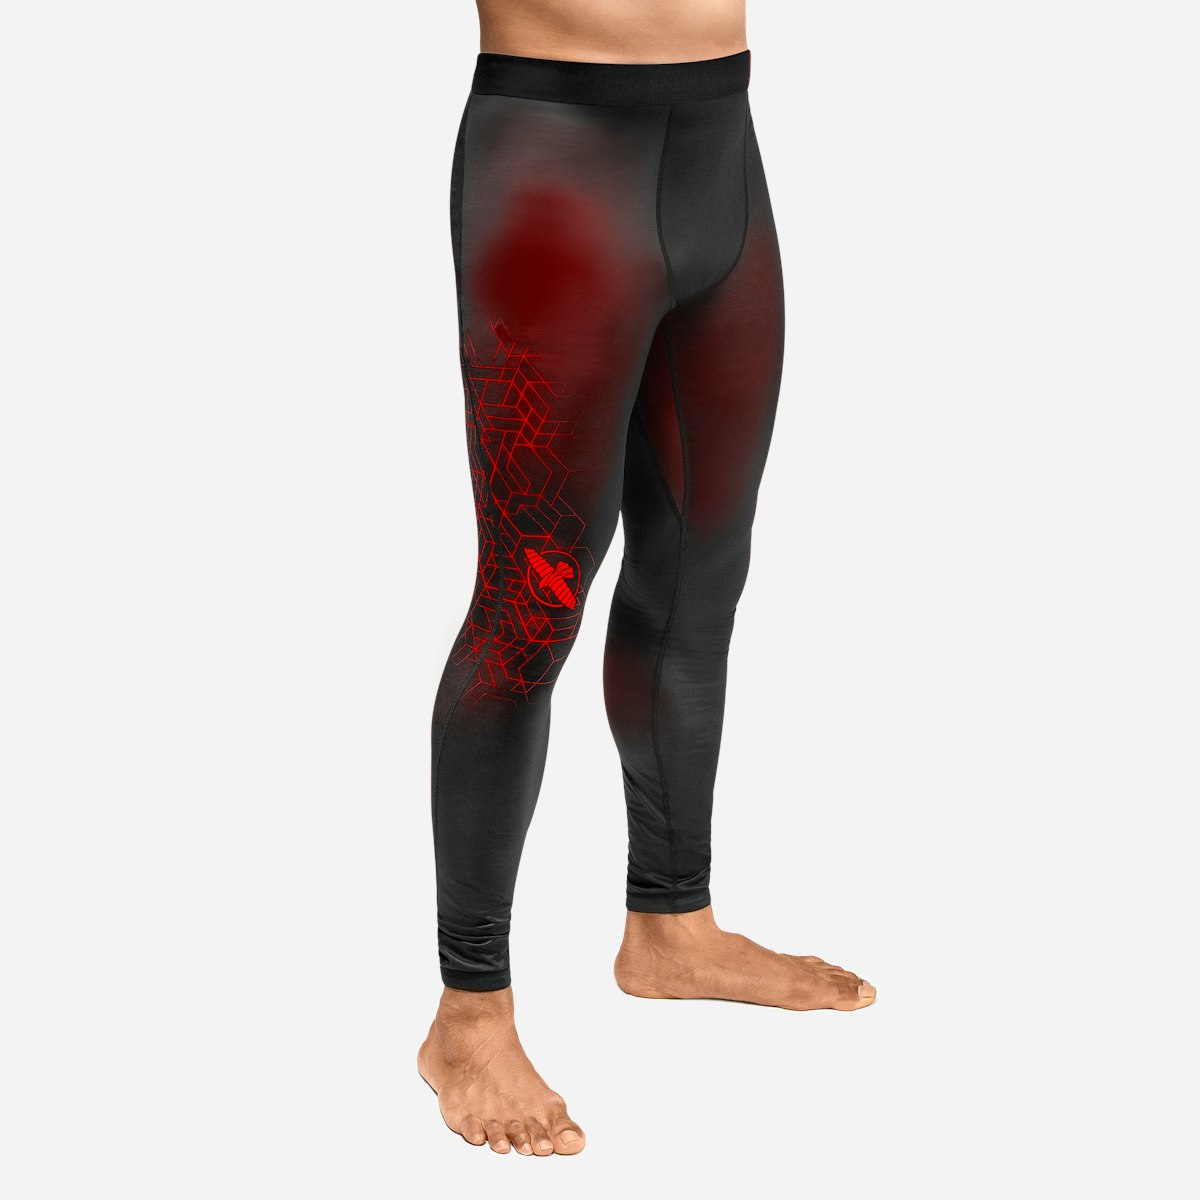 It's Like A Second Skin: SKINS Compression Tights Review & Giveaway —  FitXBrit